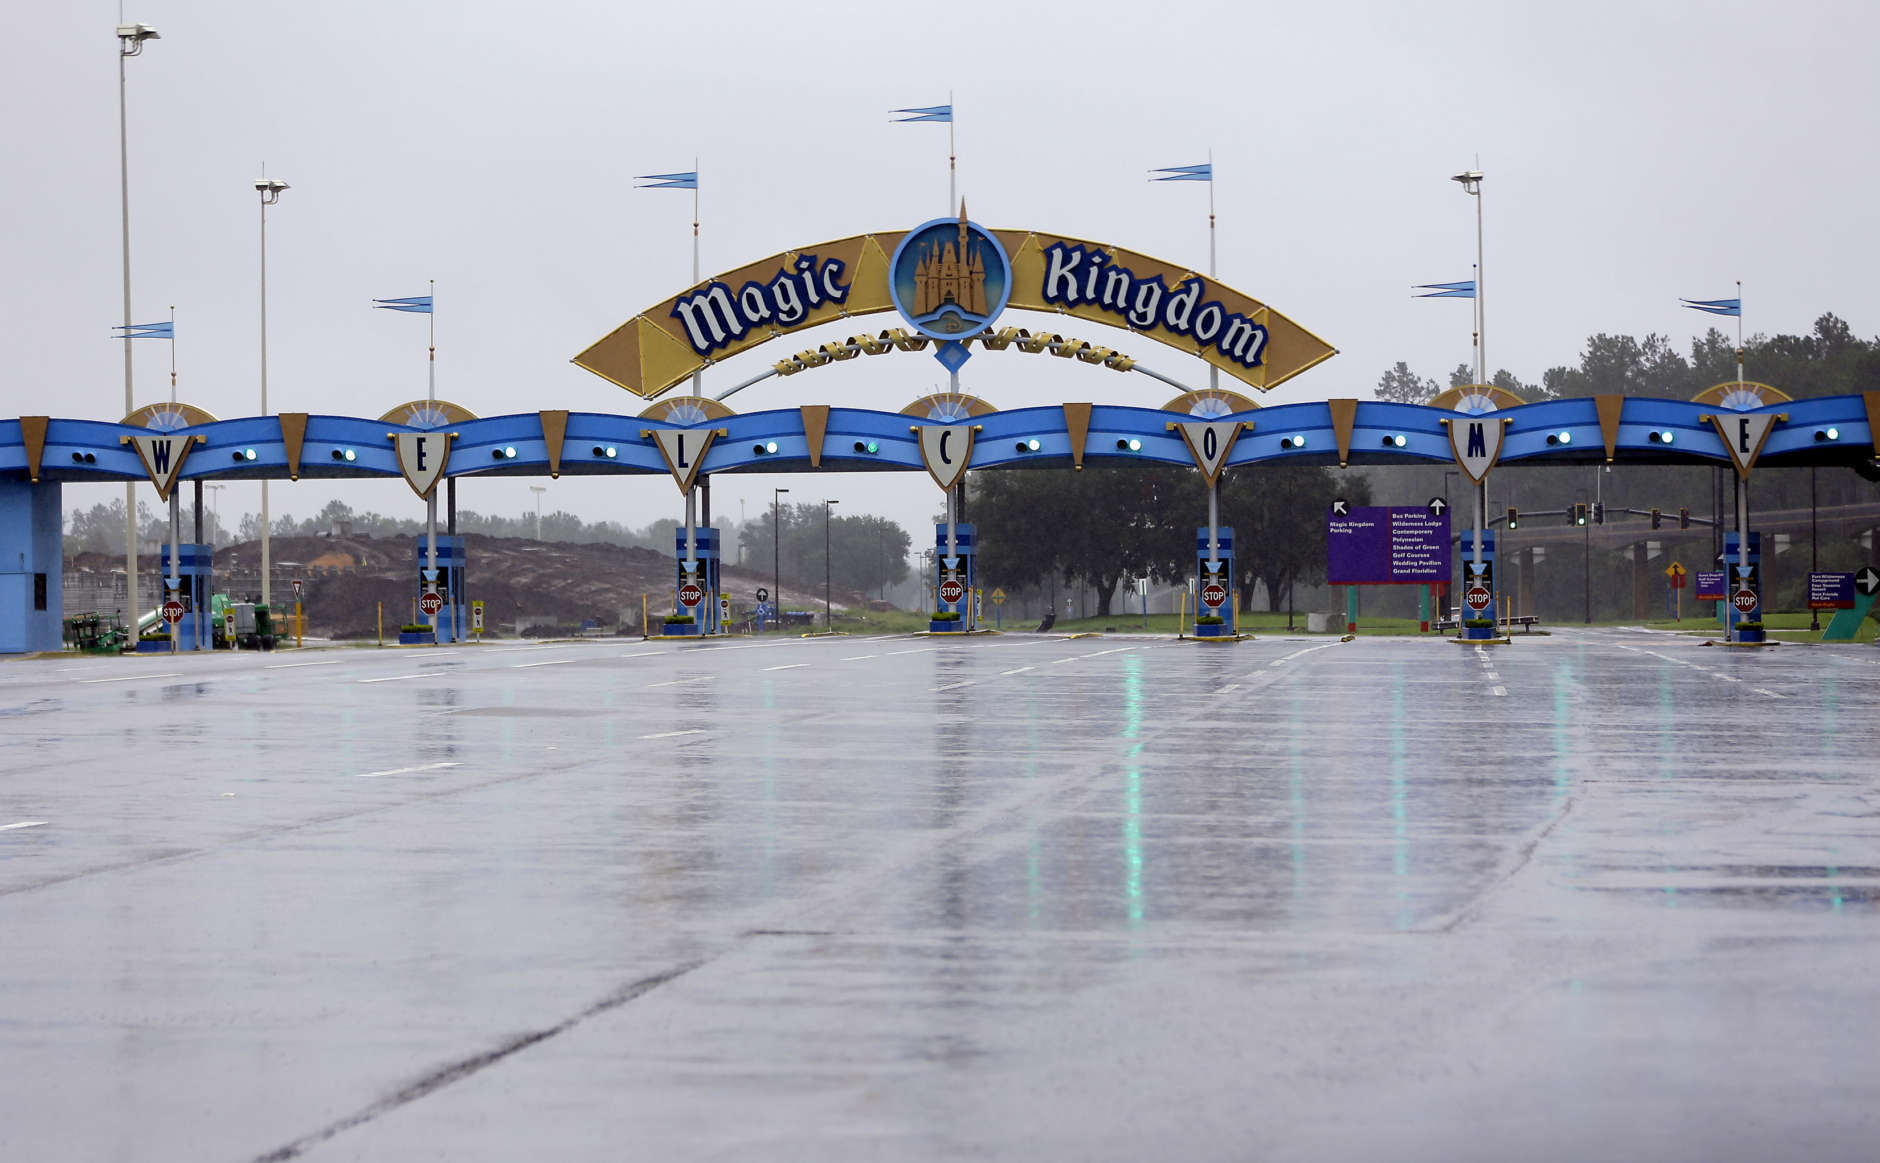 The entrance to the Magic Kingdom at Disney World is empty as the theme park was closed because of Hurricane Irma, Sunday, Sept. 10, 2017, in Lake Buena Vista, Fla. Other tourists attractions including Universal Studios and Sea World were also closed and planned to reopen Tuesday. (AP Photo/John Raoux)